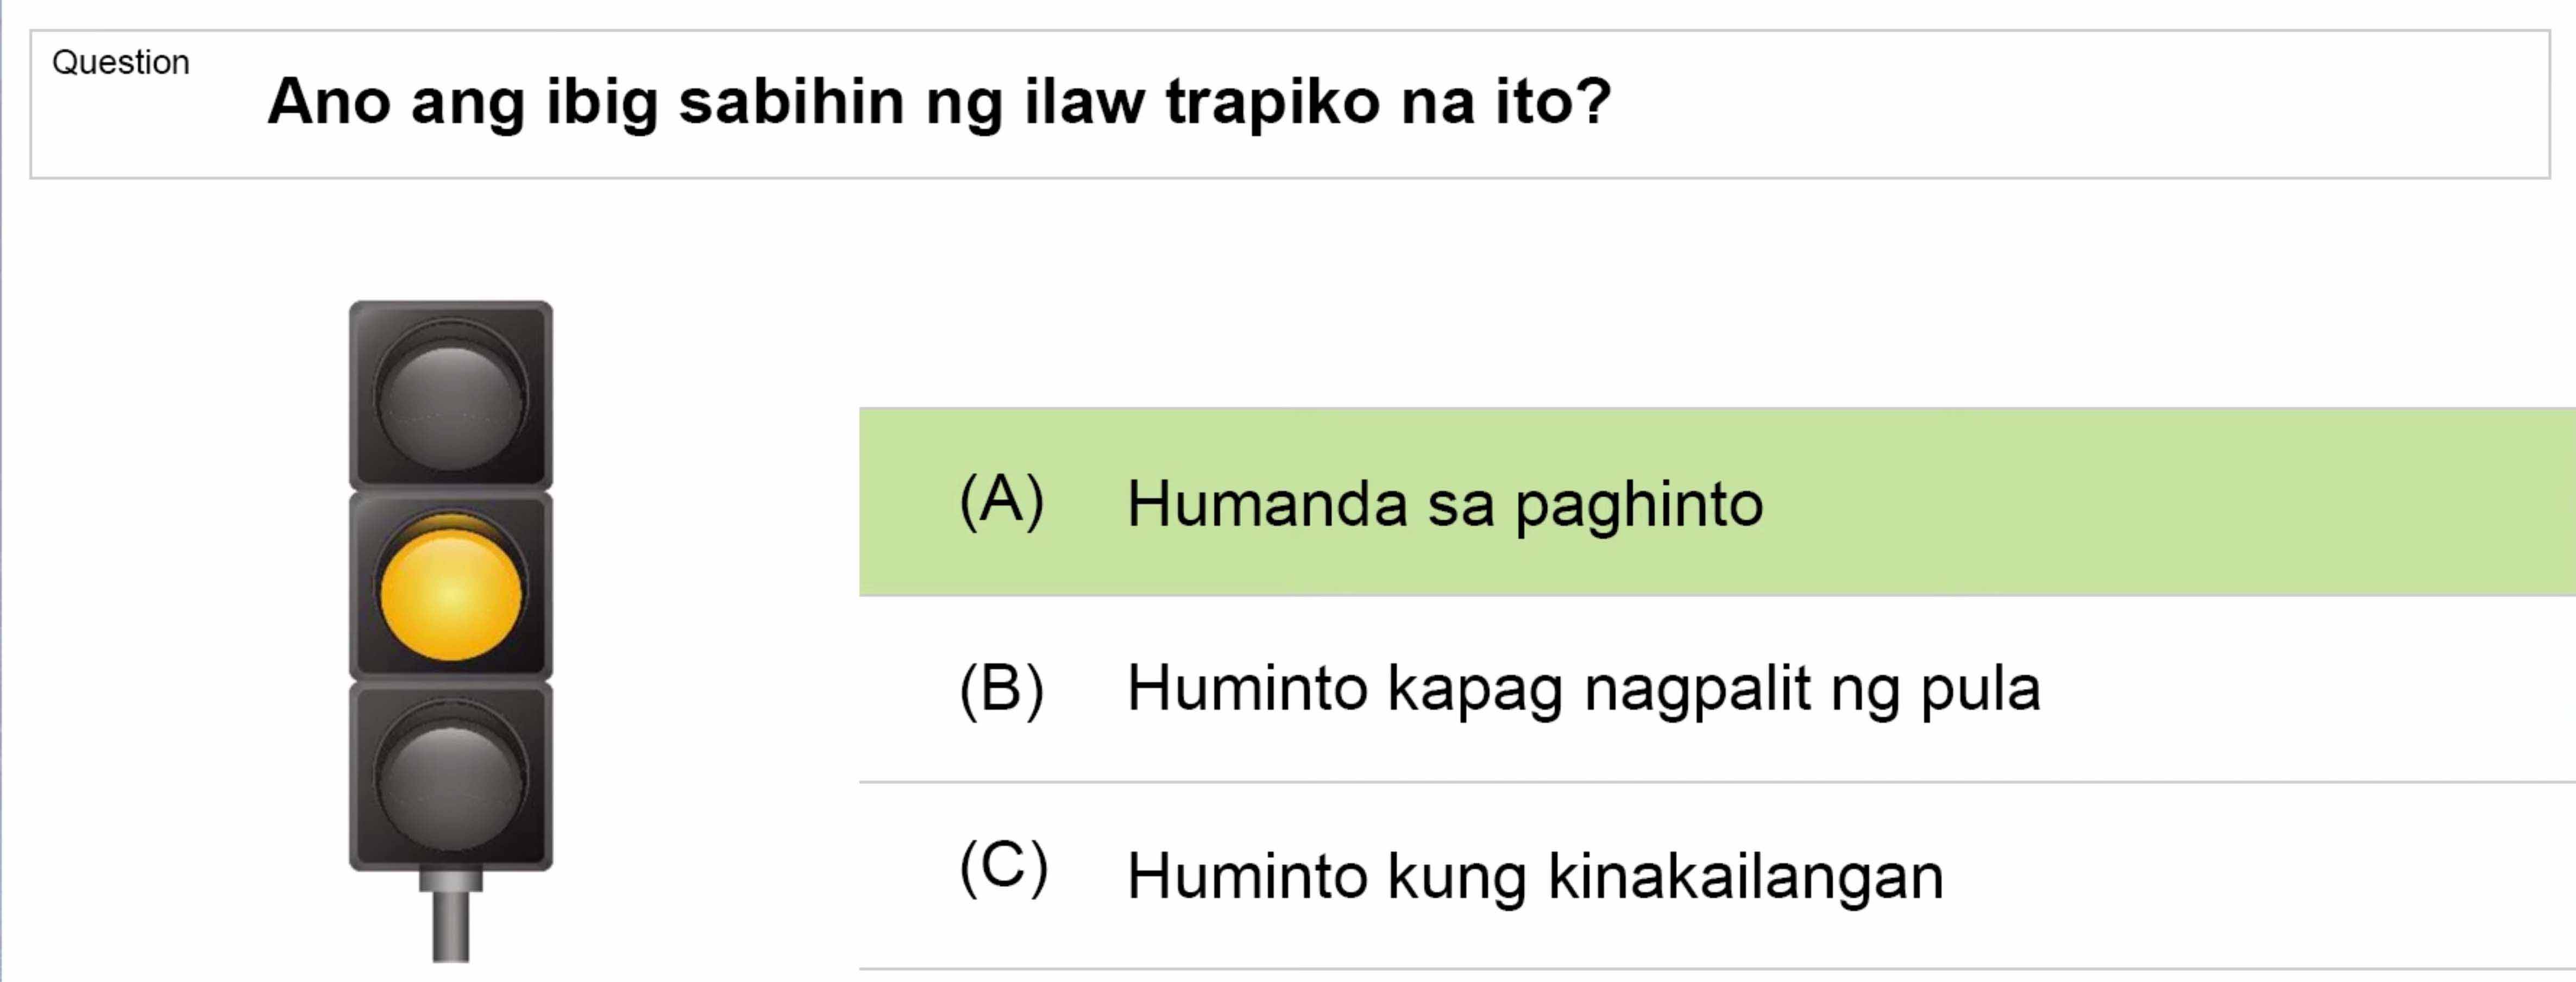 LTO Tagalog non professional exam reviewer motorcycle 1 (19)